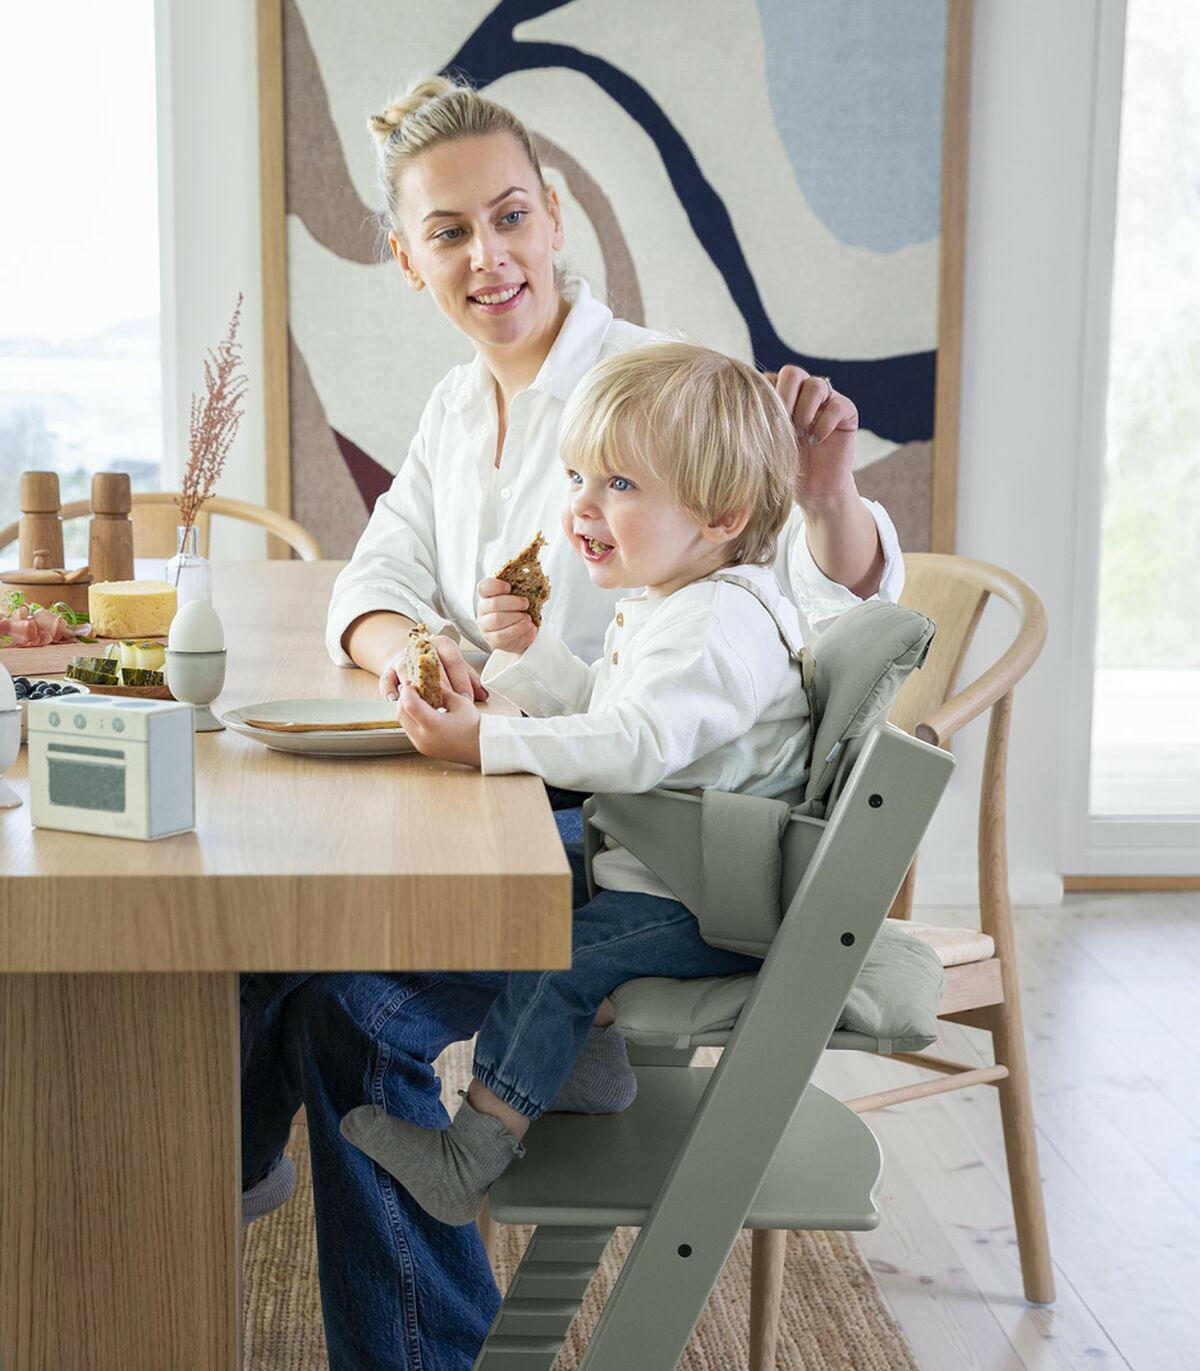 Custom Tray Compatible with Stokke Tripp Trapp Highchair